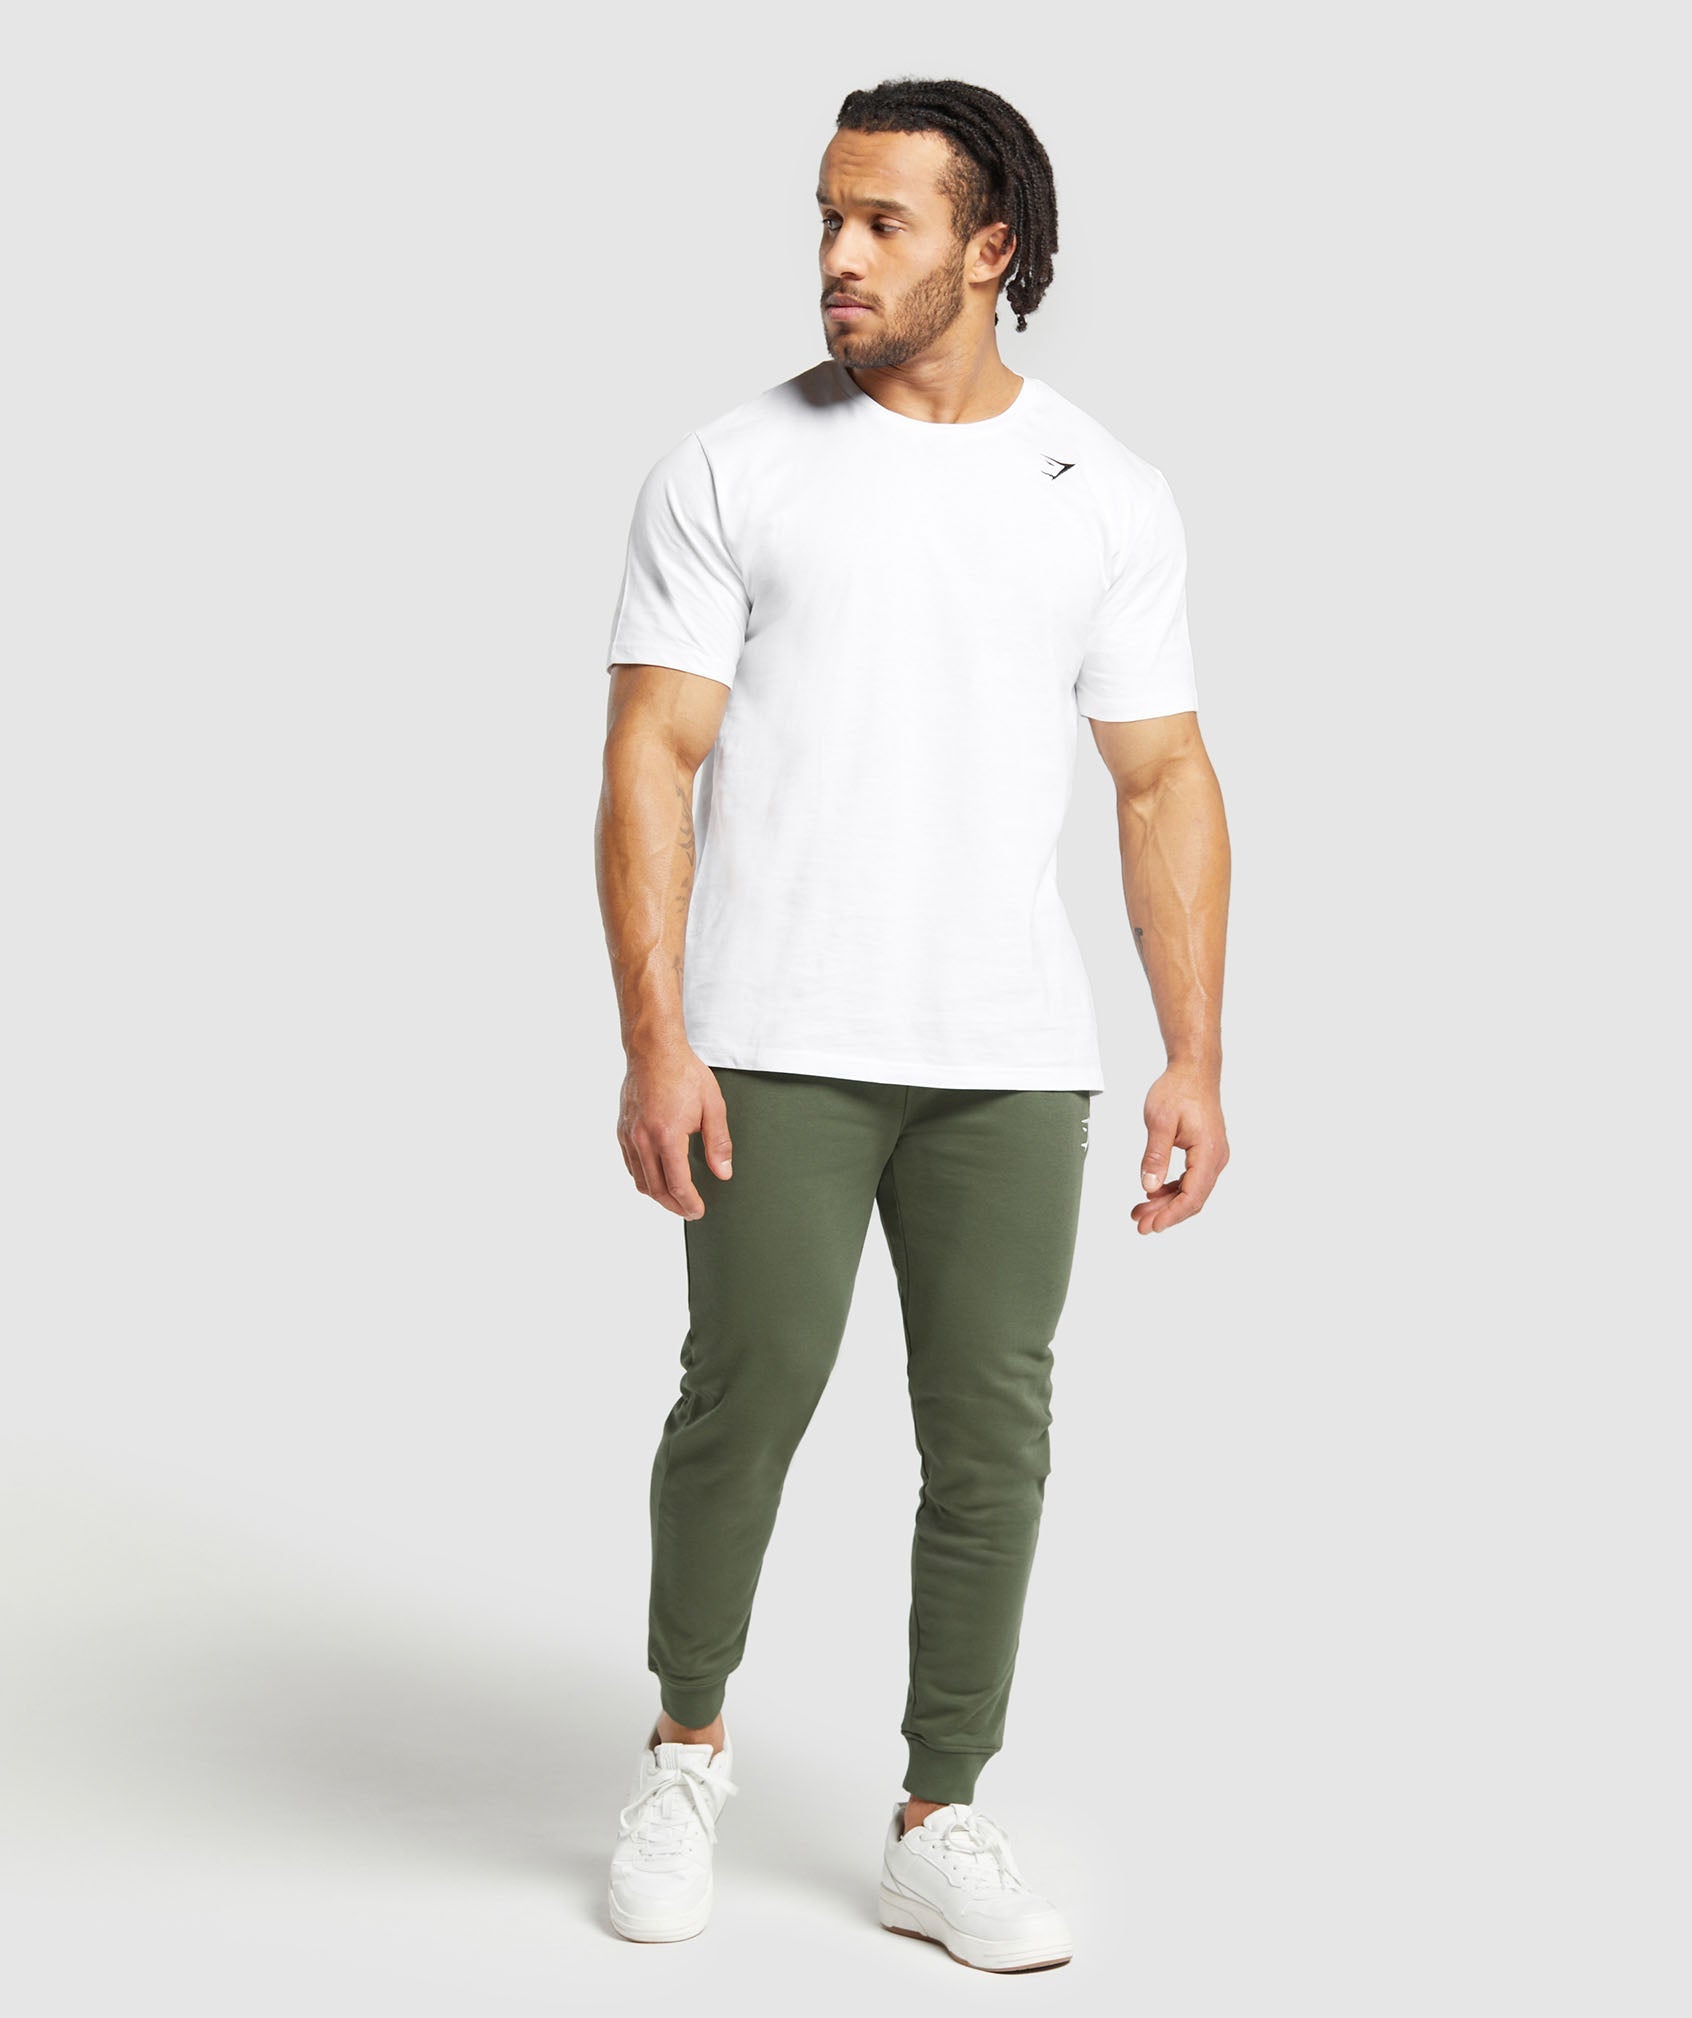 Crest Joggers in Core Olive - view 3